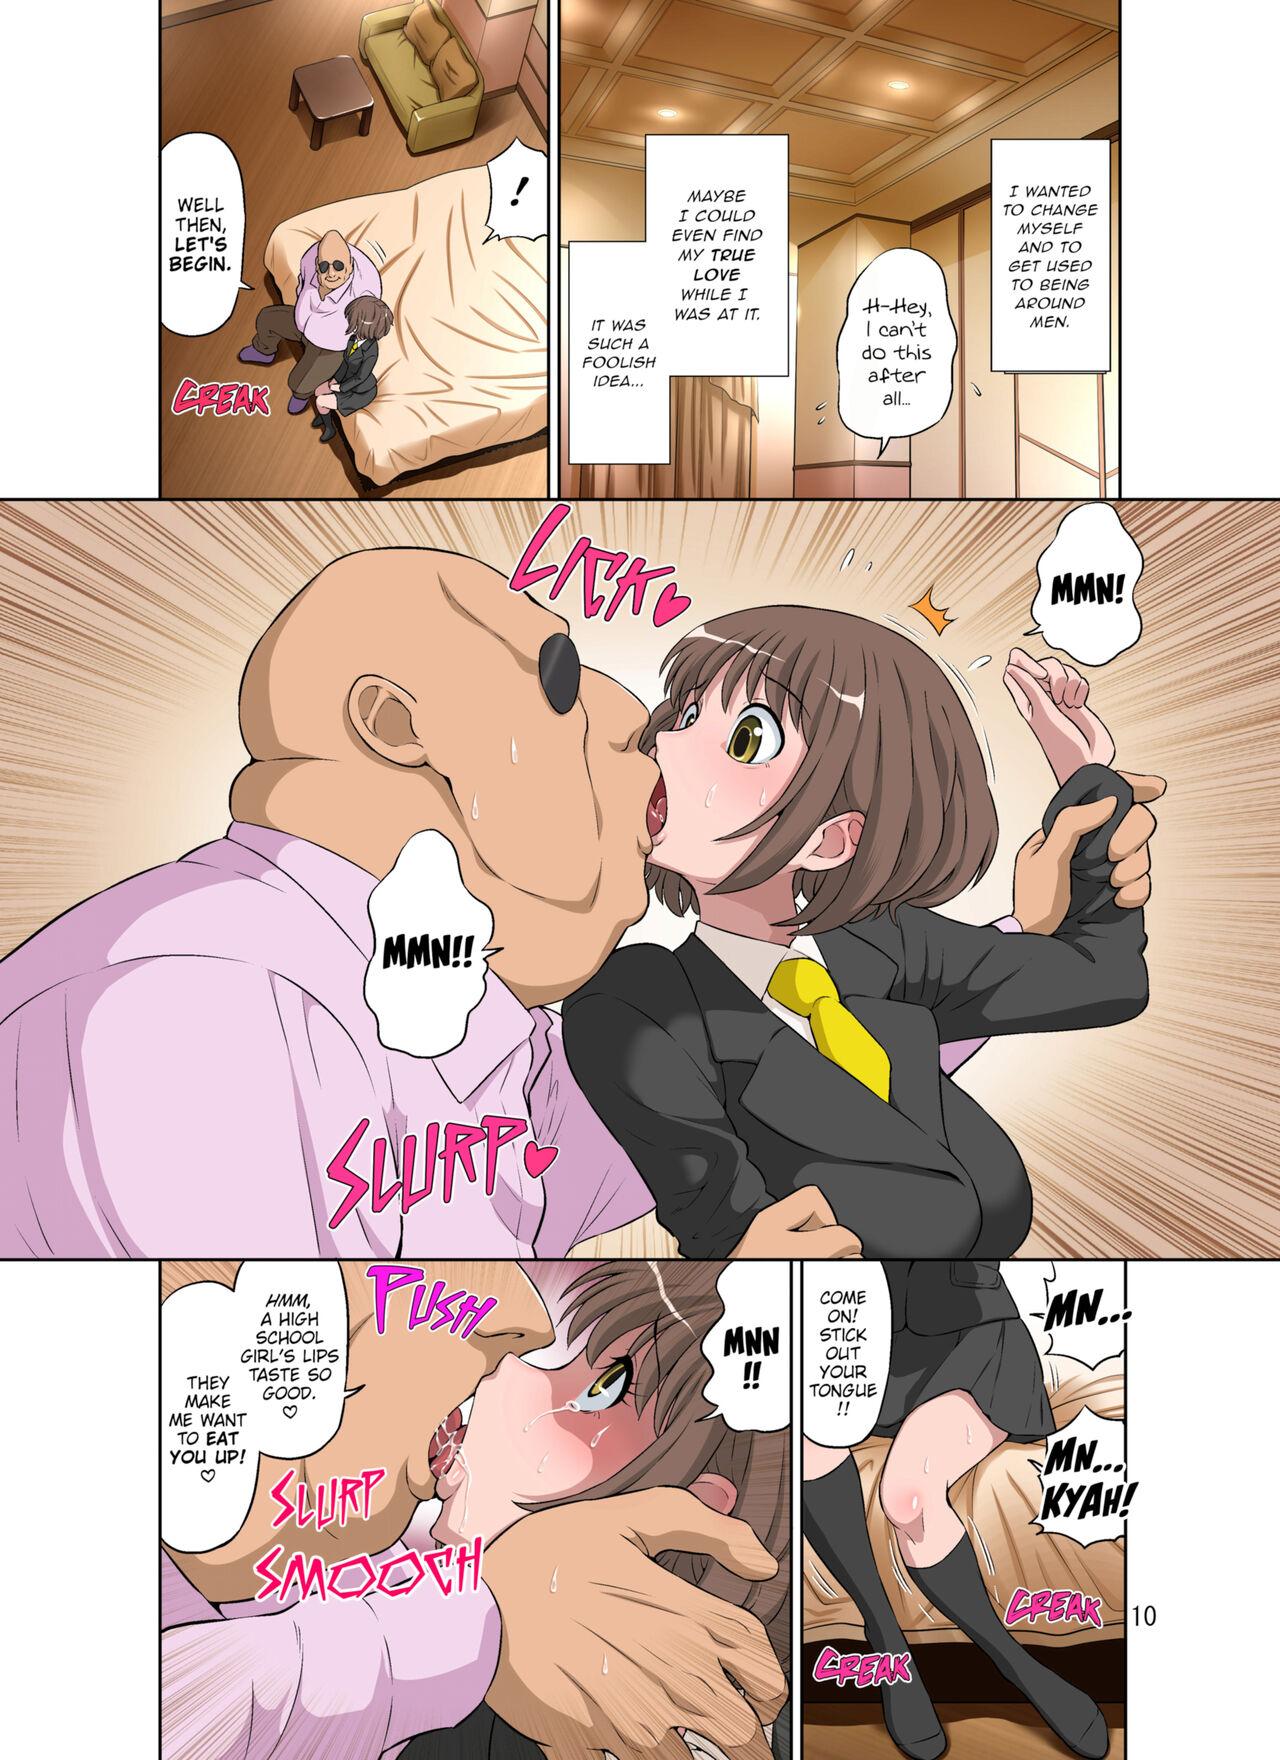 Lovers Stealing the Energetic Mom + Tanned Version - Original Groupsex - Page 10